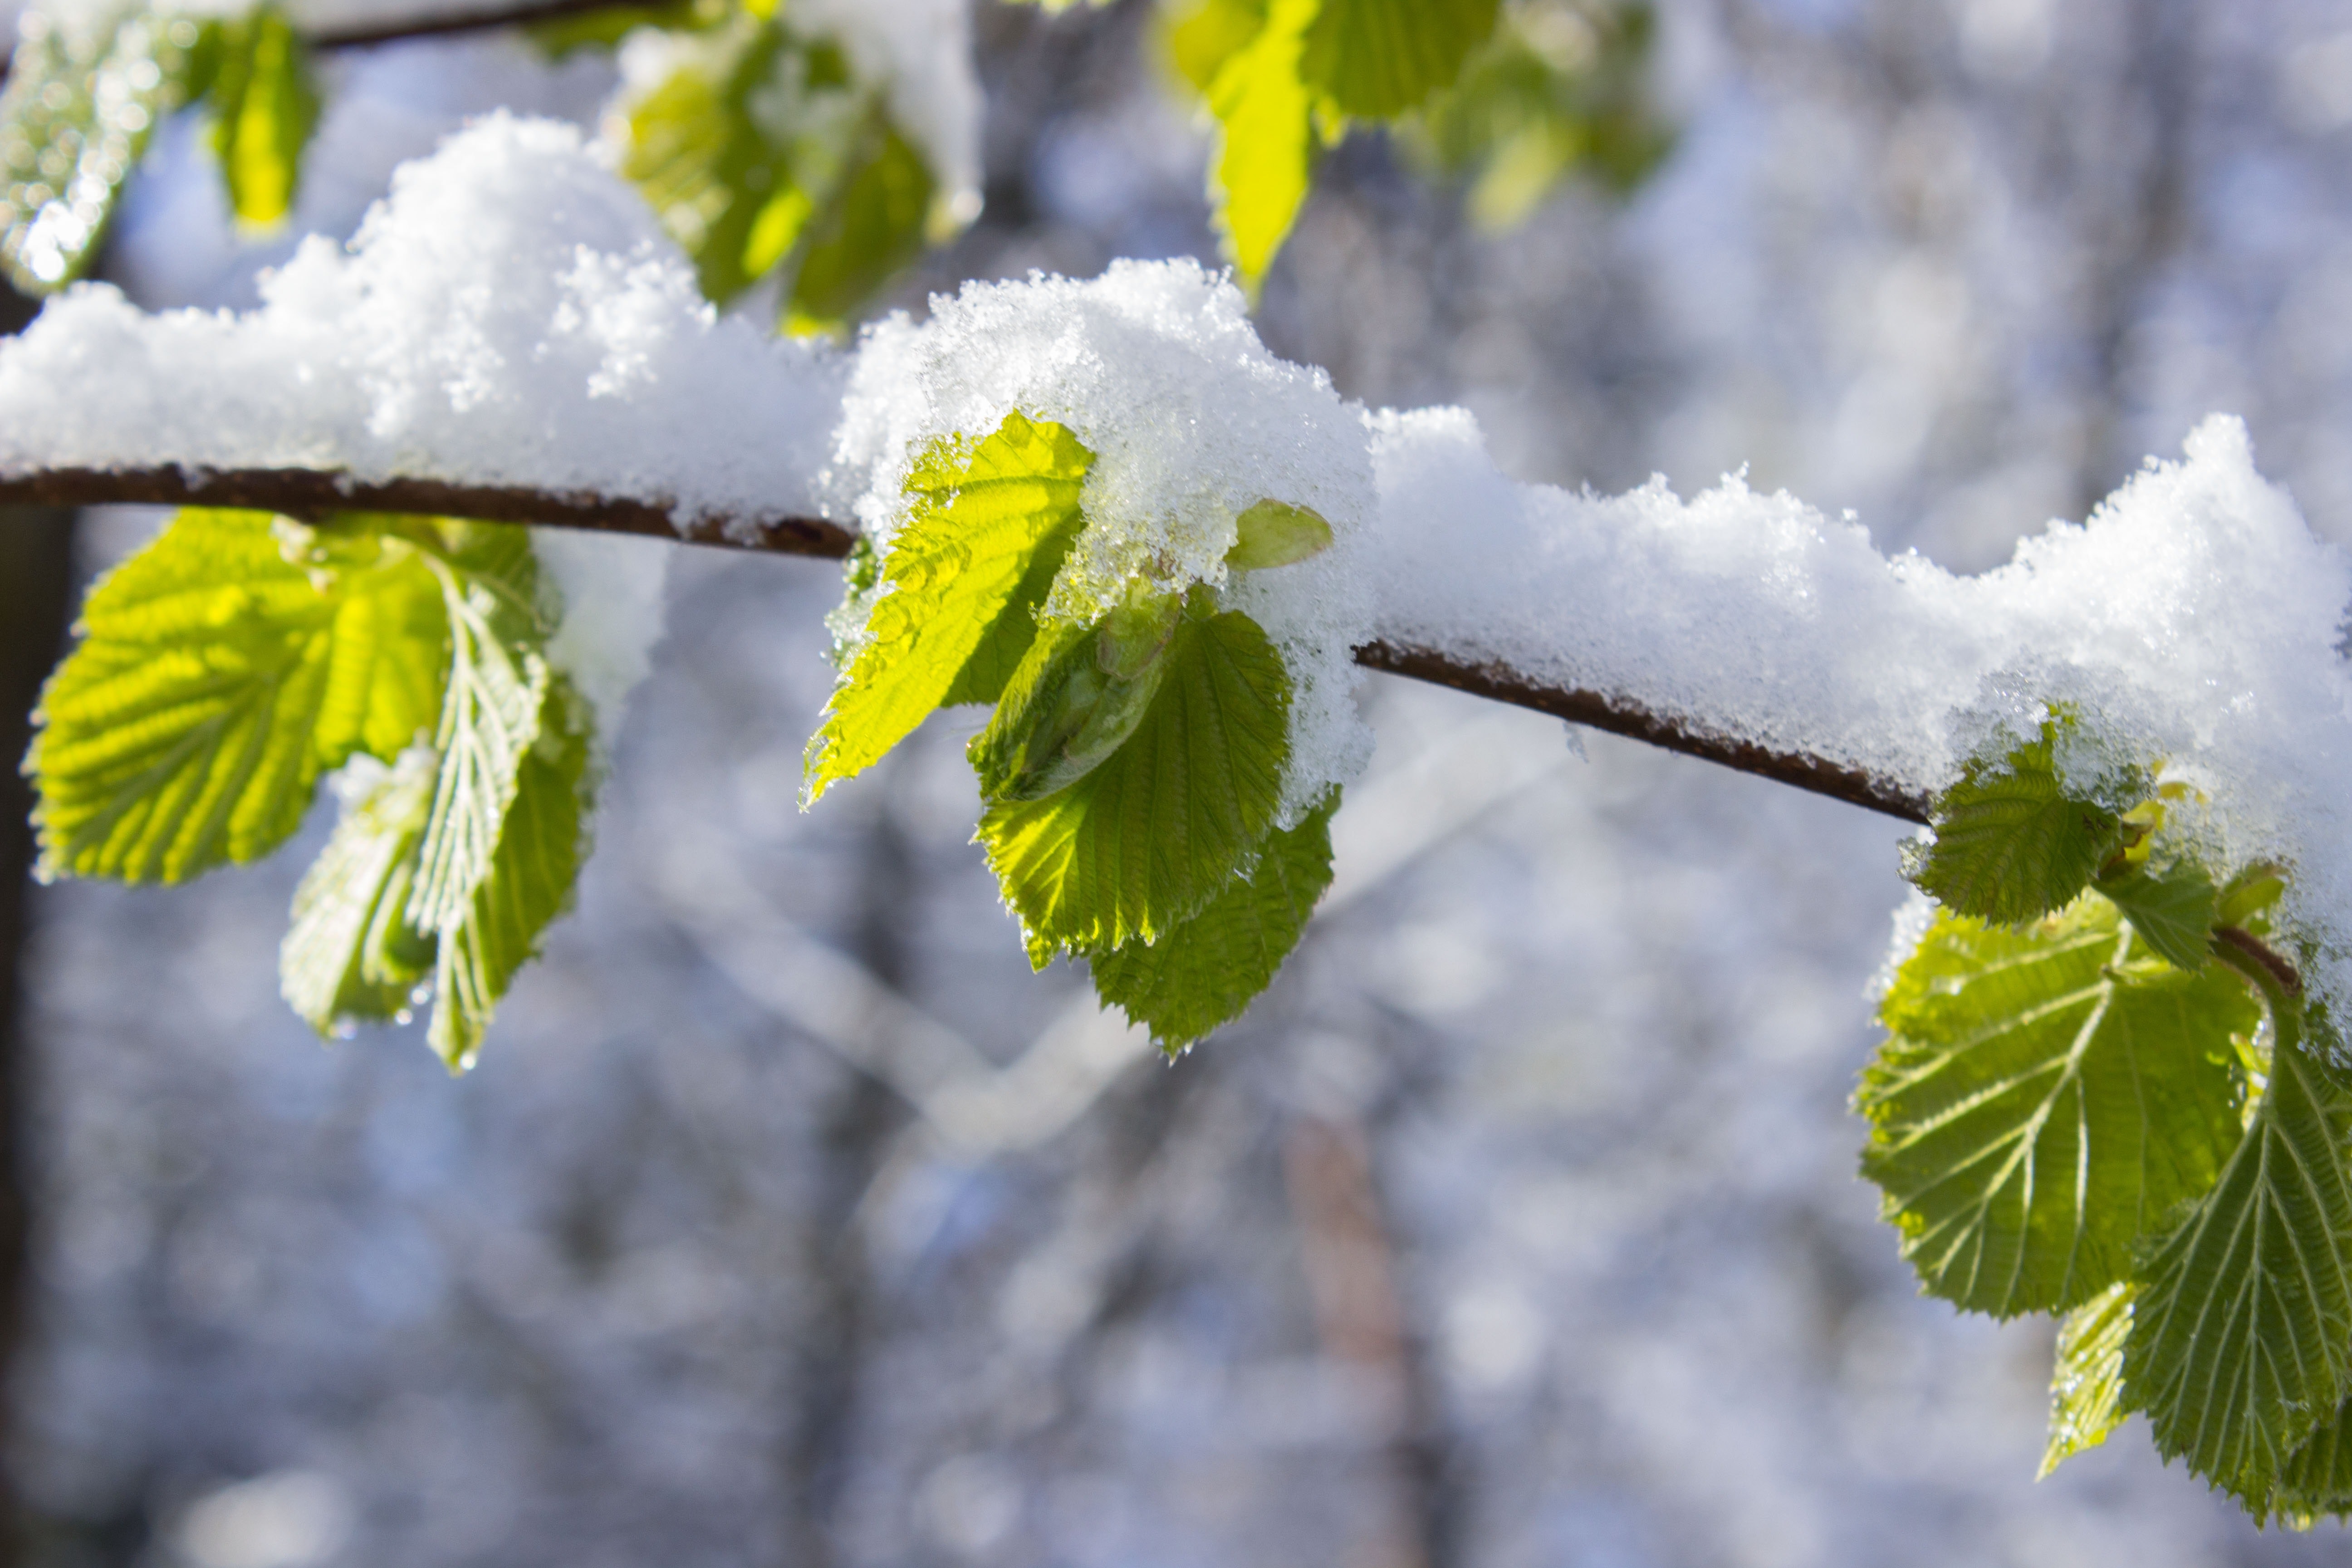 Snow capped leaves on branch at daytime photo